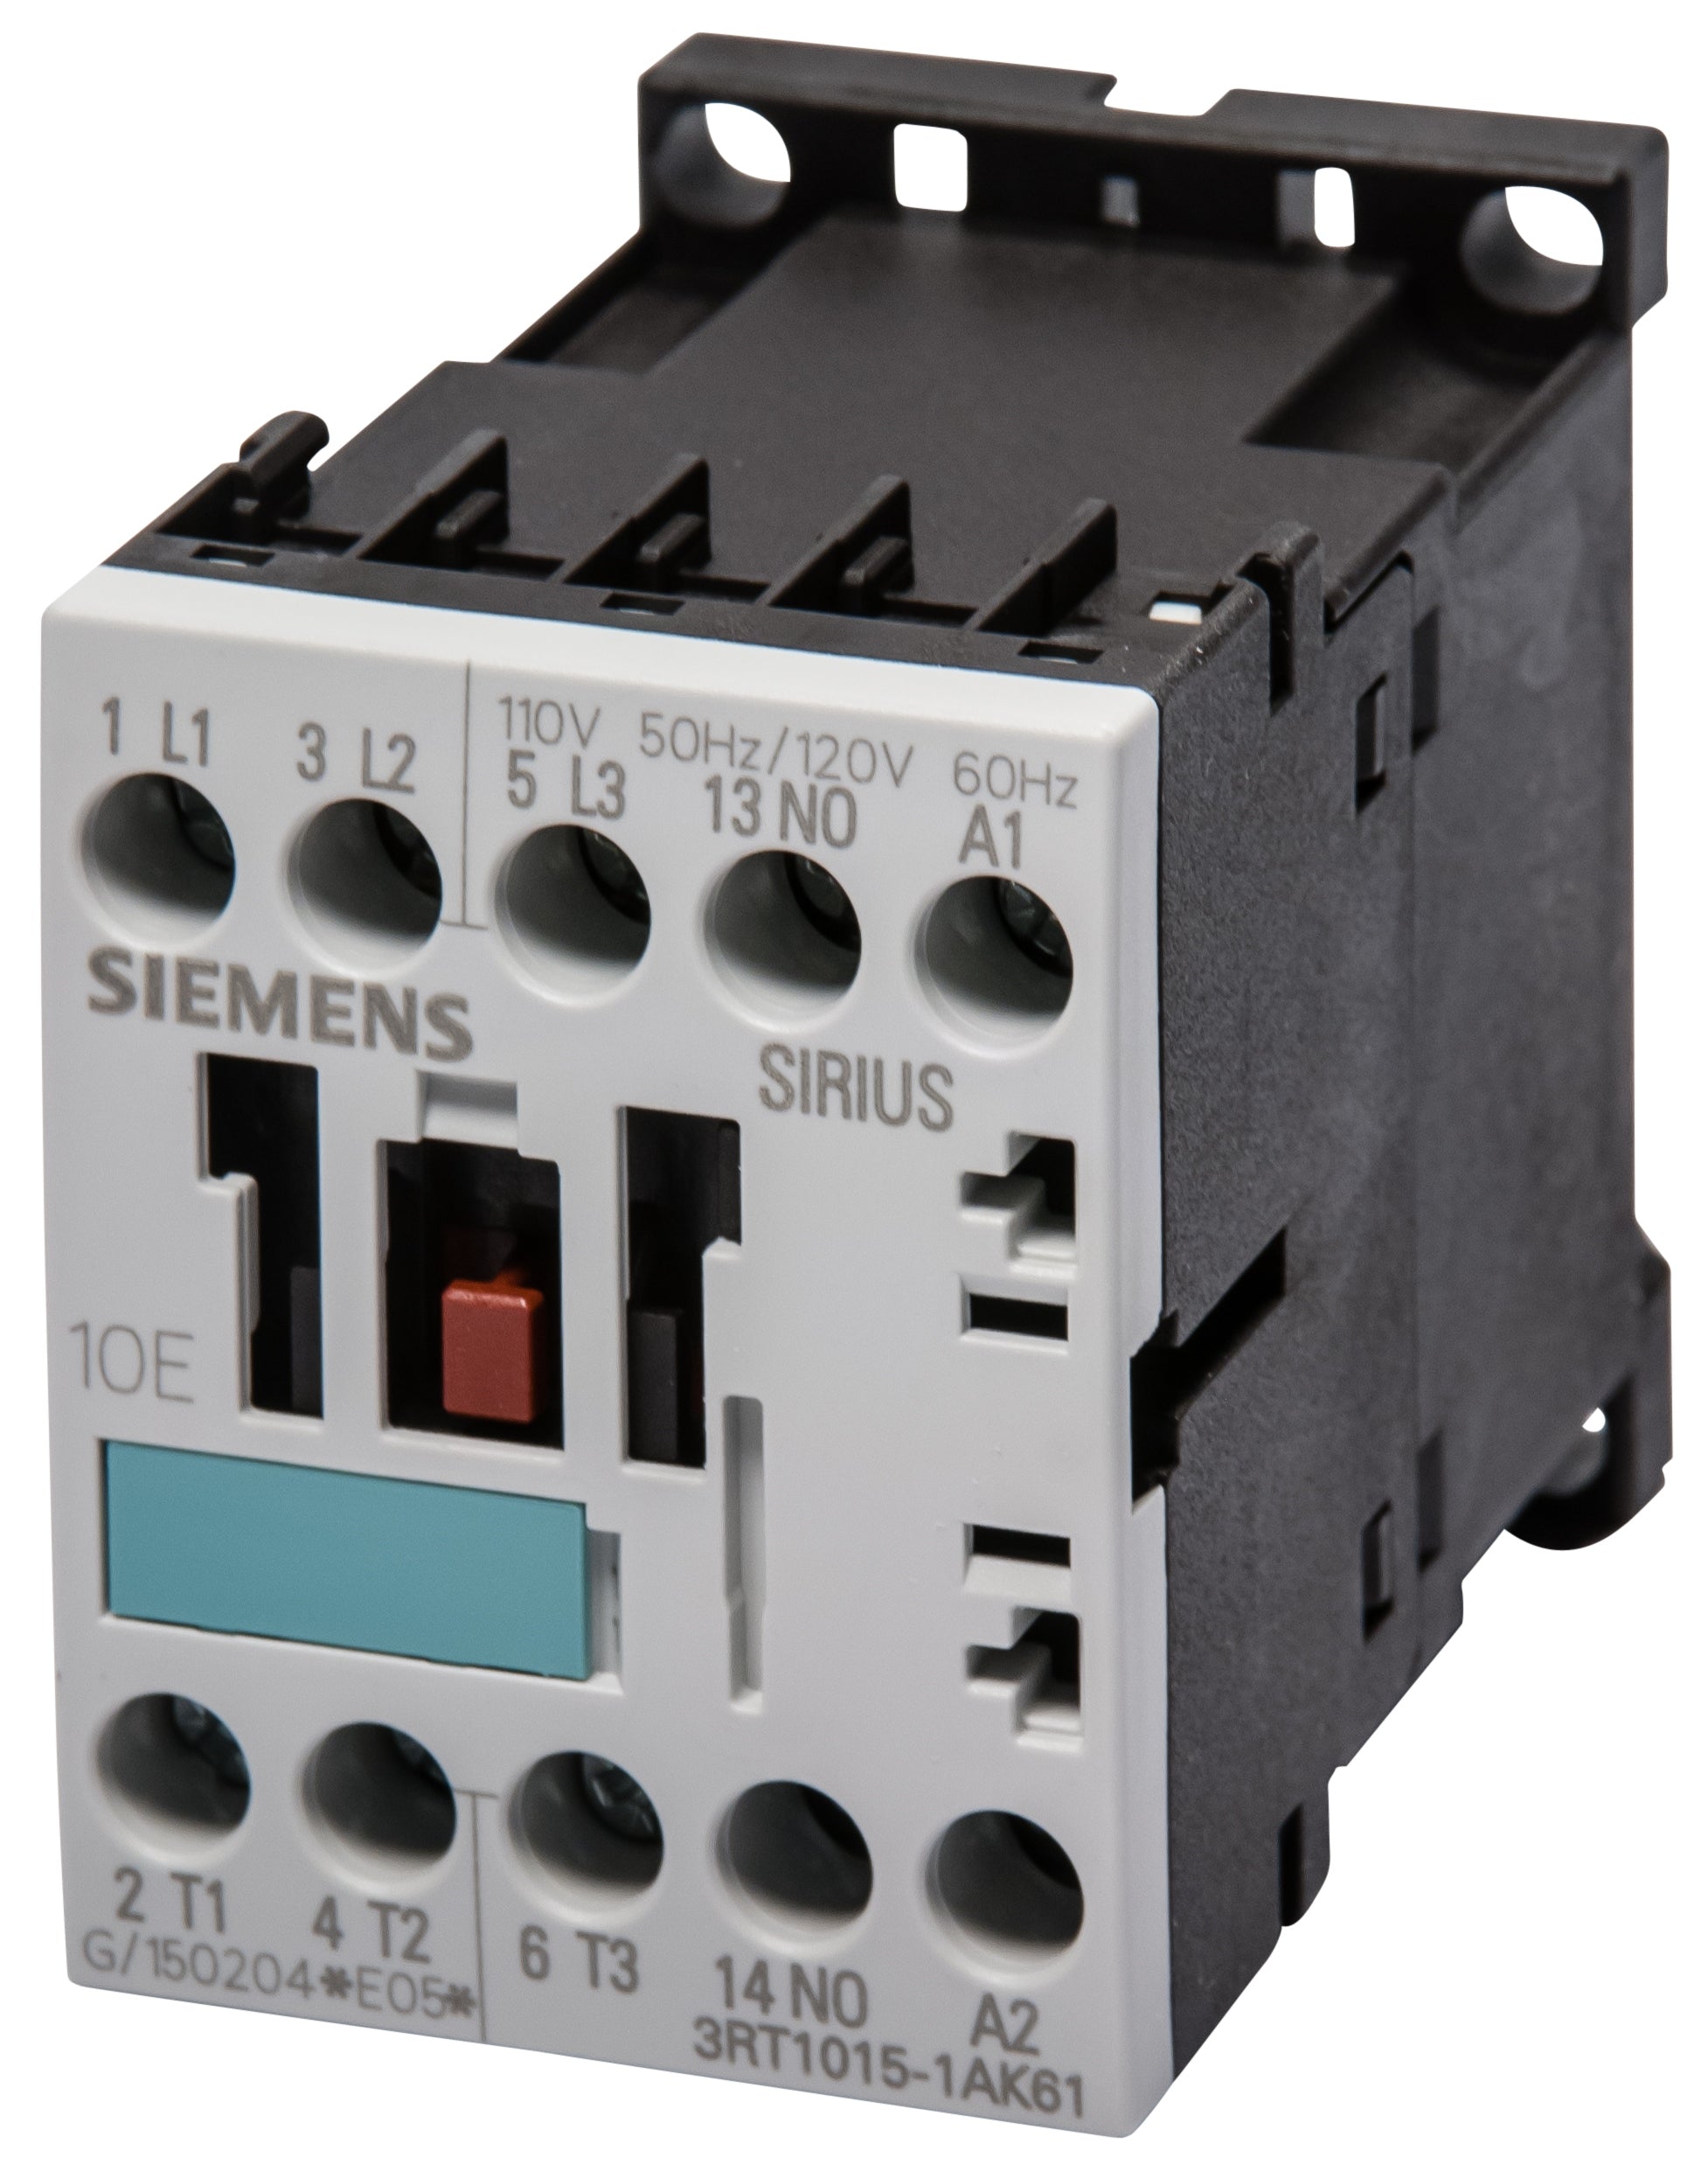 Details about   CONTACTOR 400VAC 3RT1446-1AV00 167KW 690V 140A SIRIUS SIEMENS ID27890 